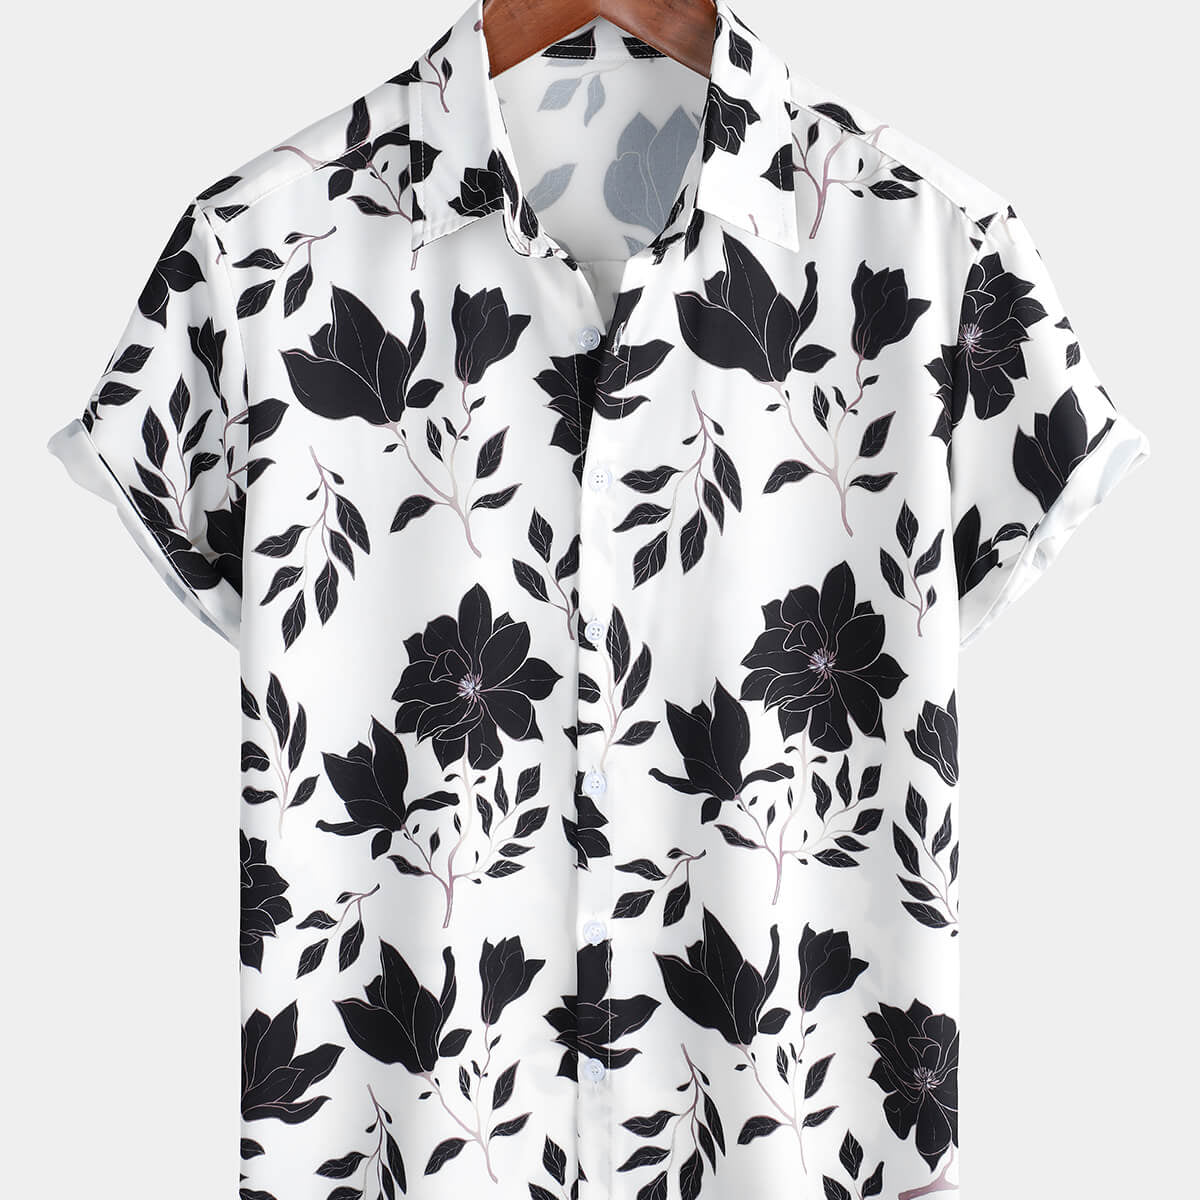 Men's Black Floral Holiday Short Sleeve Button Up Shirt